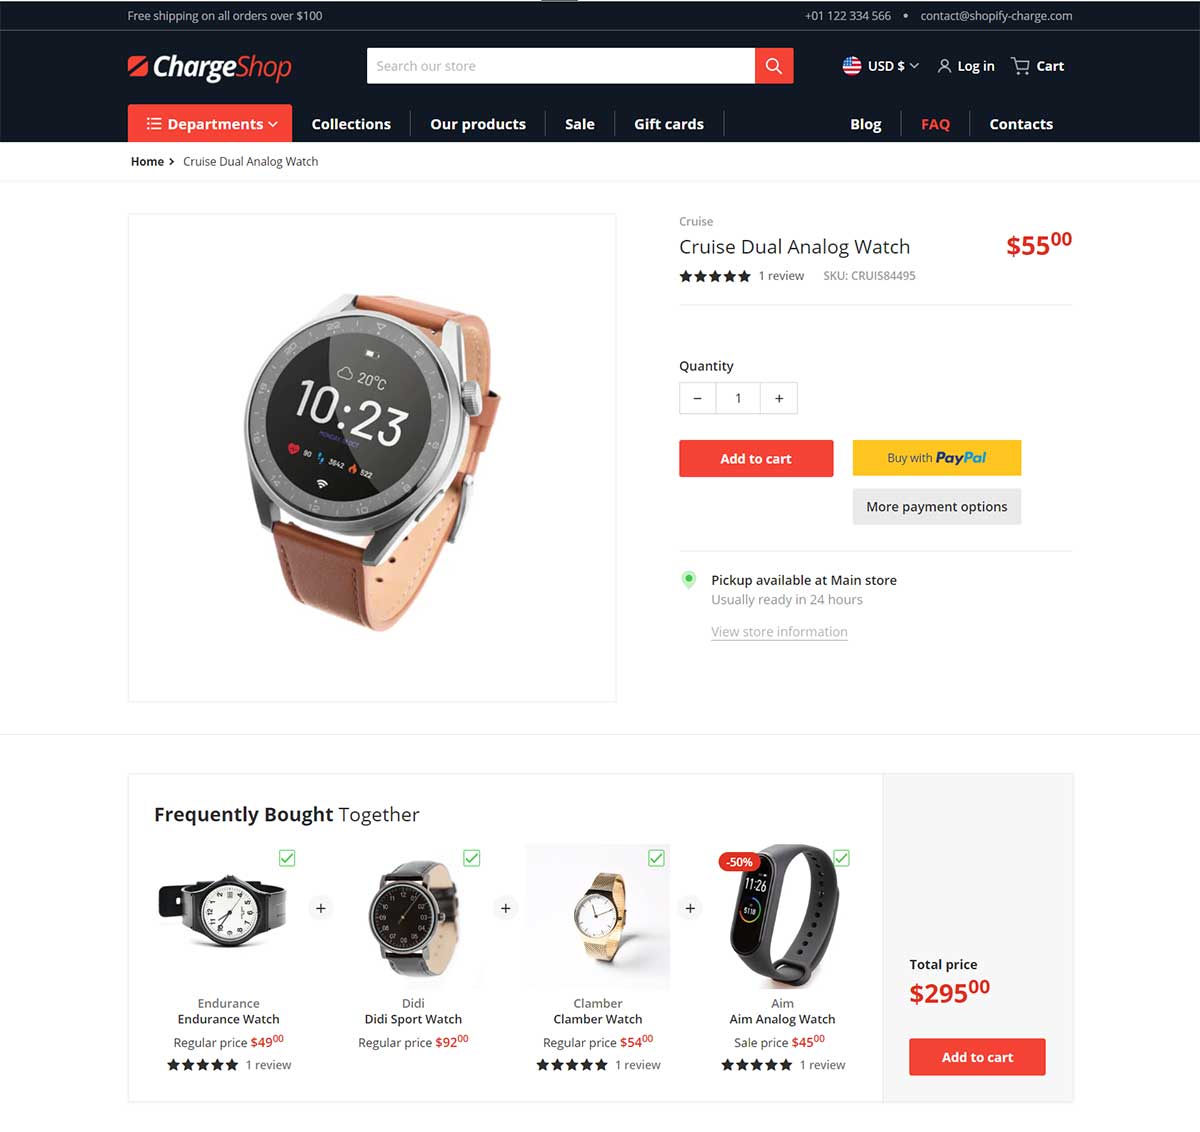 Charge Theme - Product Page Layout